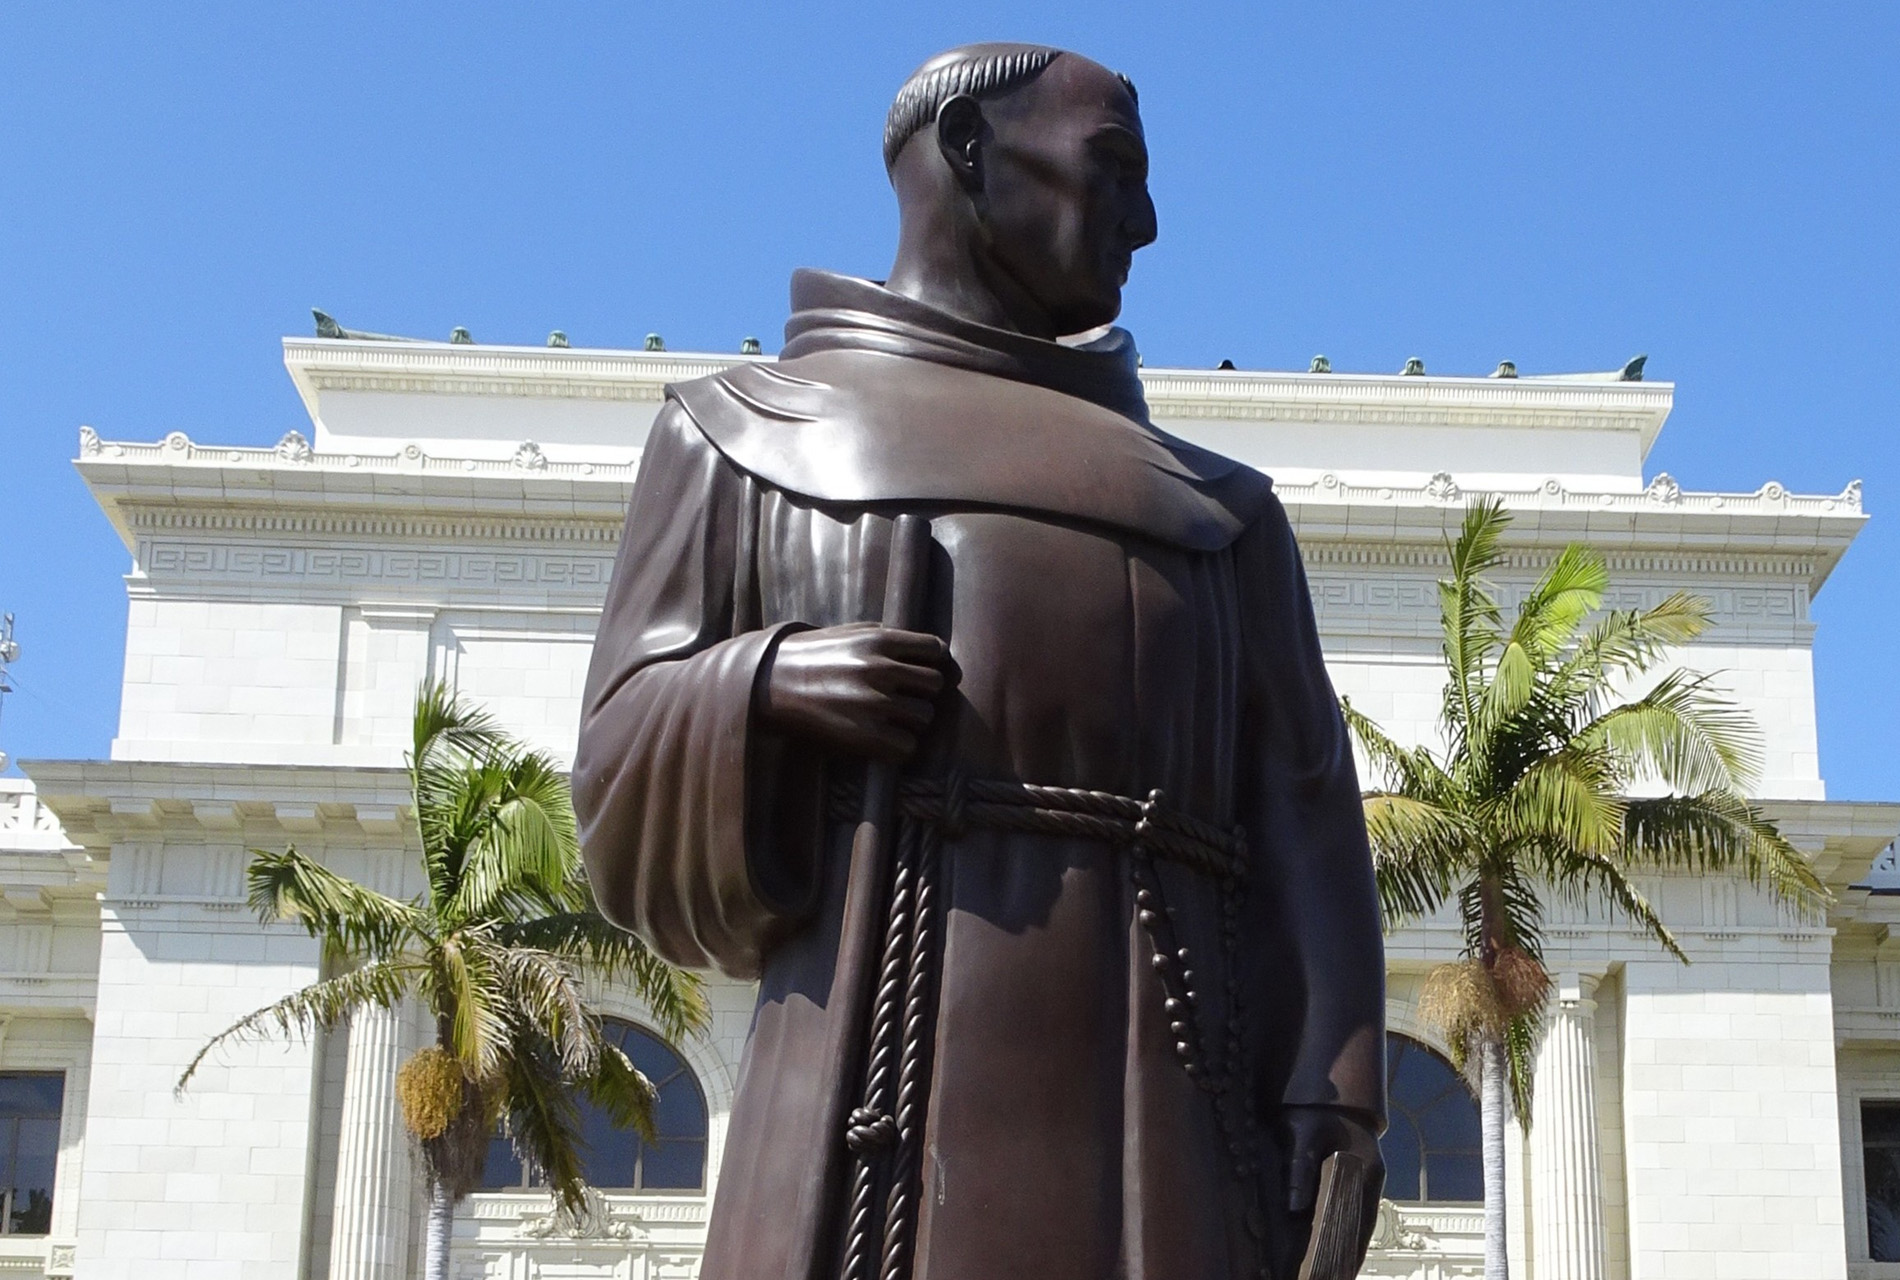 A bronze figure of the 18th century missionary Junípero Serra stands outside Ventura City Hall, sculpted in 1936 by Uno John Palo Kangas. Indigenous activists say a reckoning with Serra's legacy is long overdue.